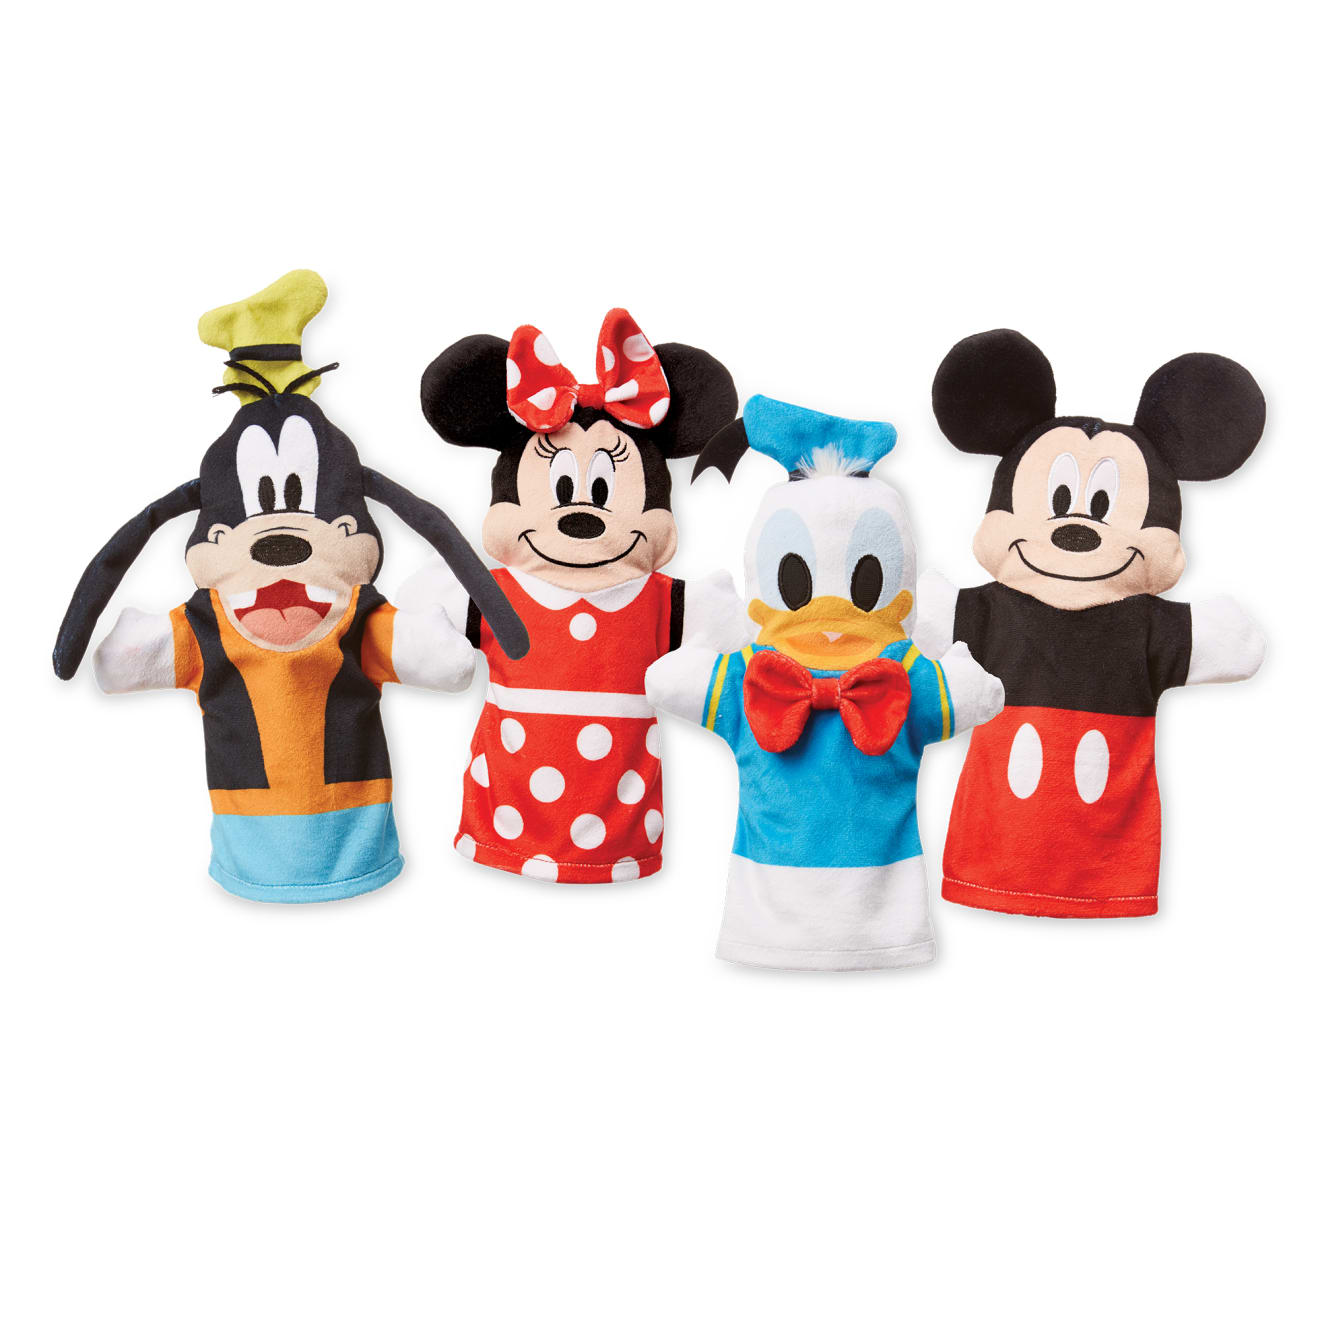 mickey mouse clubhouse plush toys